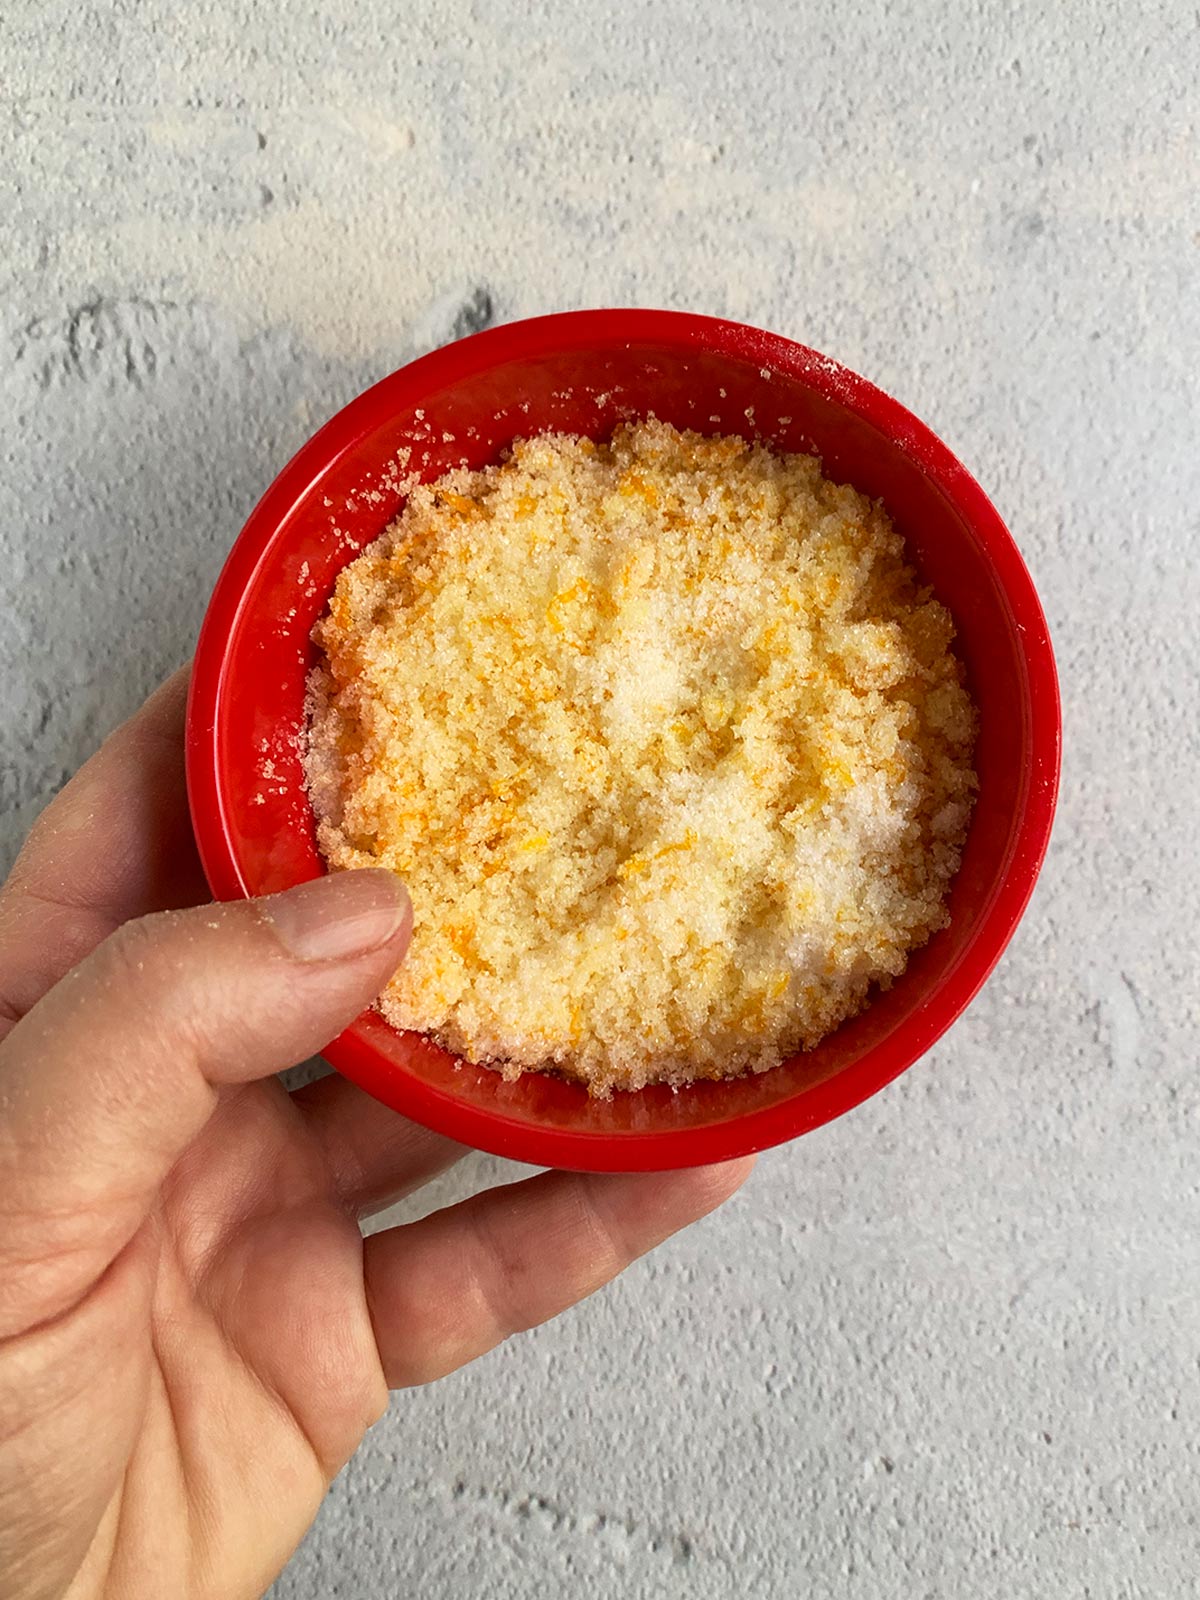 Orange zest and sugar mixed together in a red bowl.